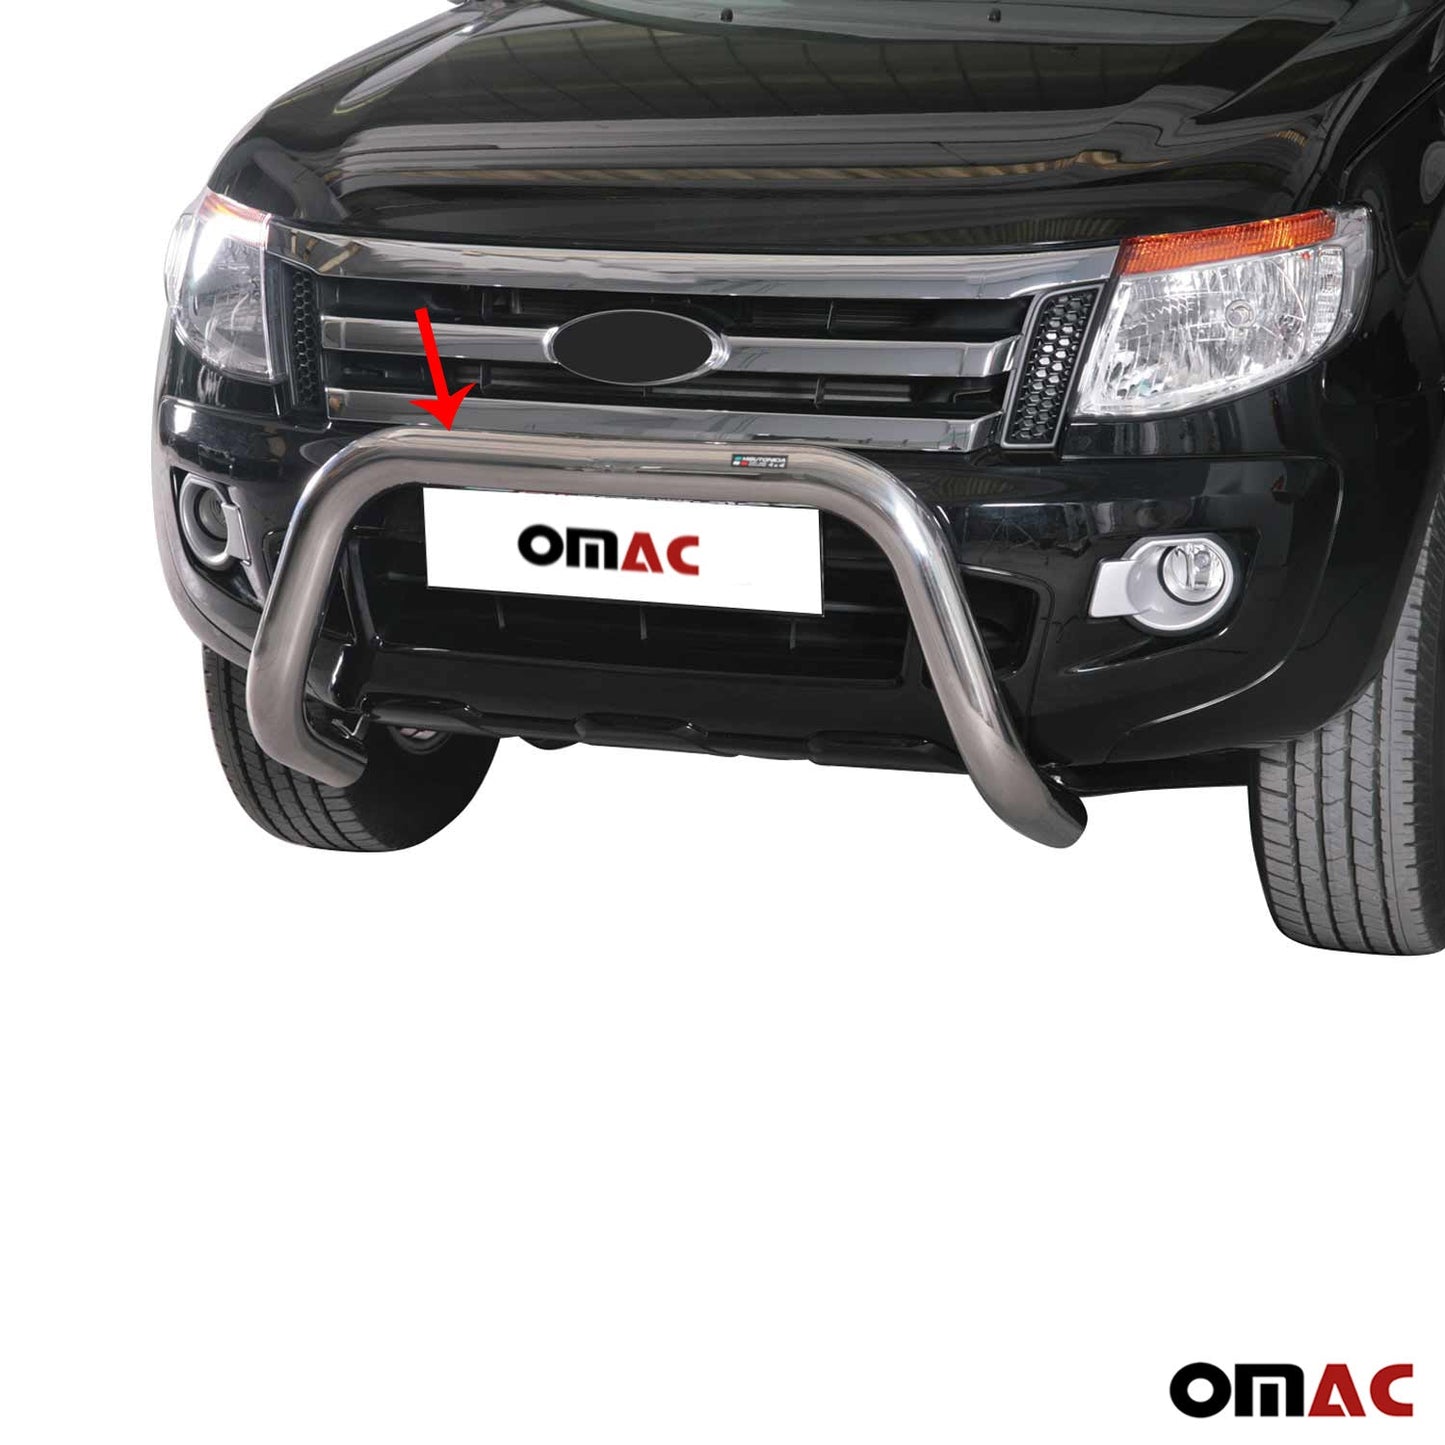 OMAC Bull Bar Push Front Bumper Grille for Ford Ranger 2019-2023 Silver 1 Pc 2619MSBB072